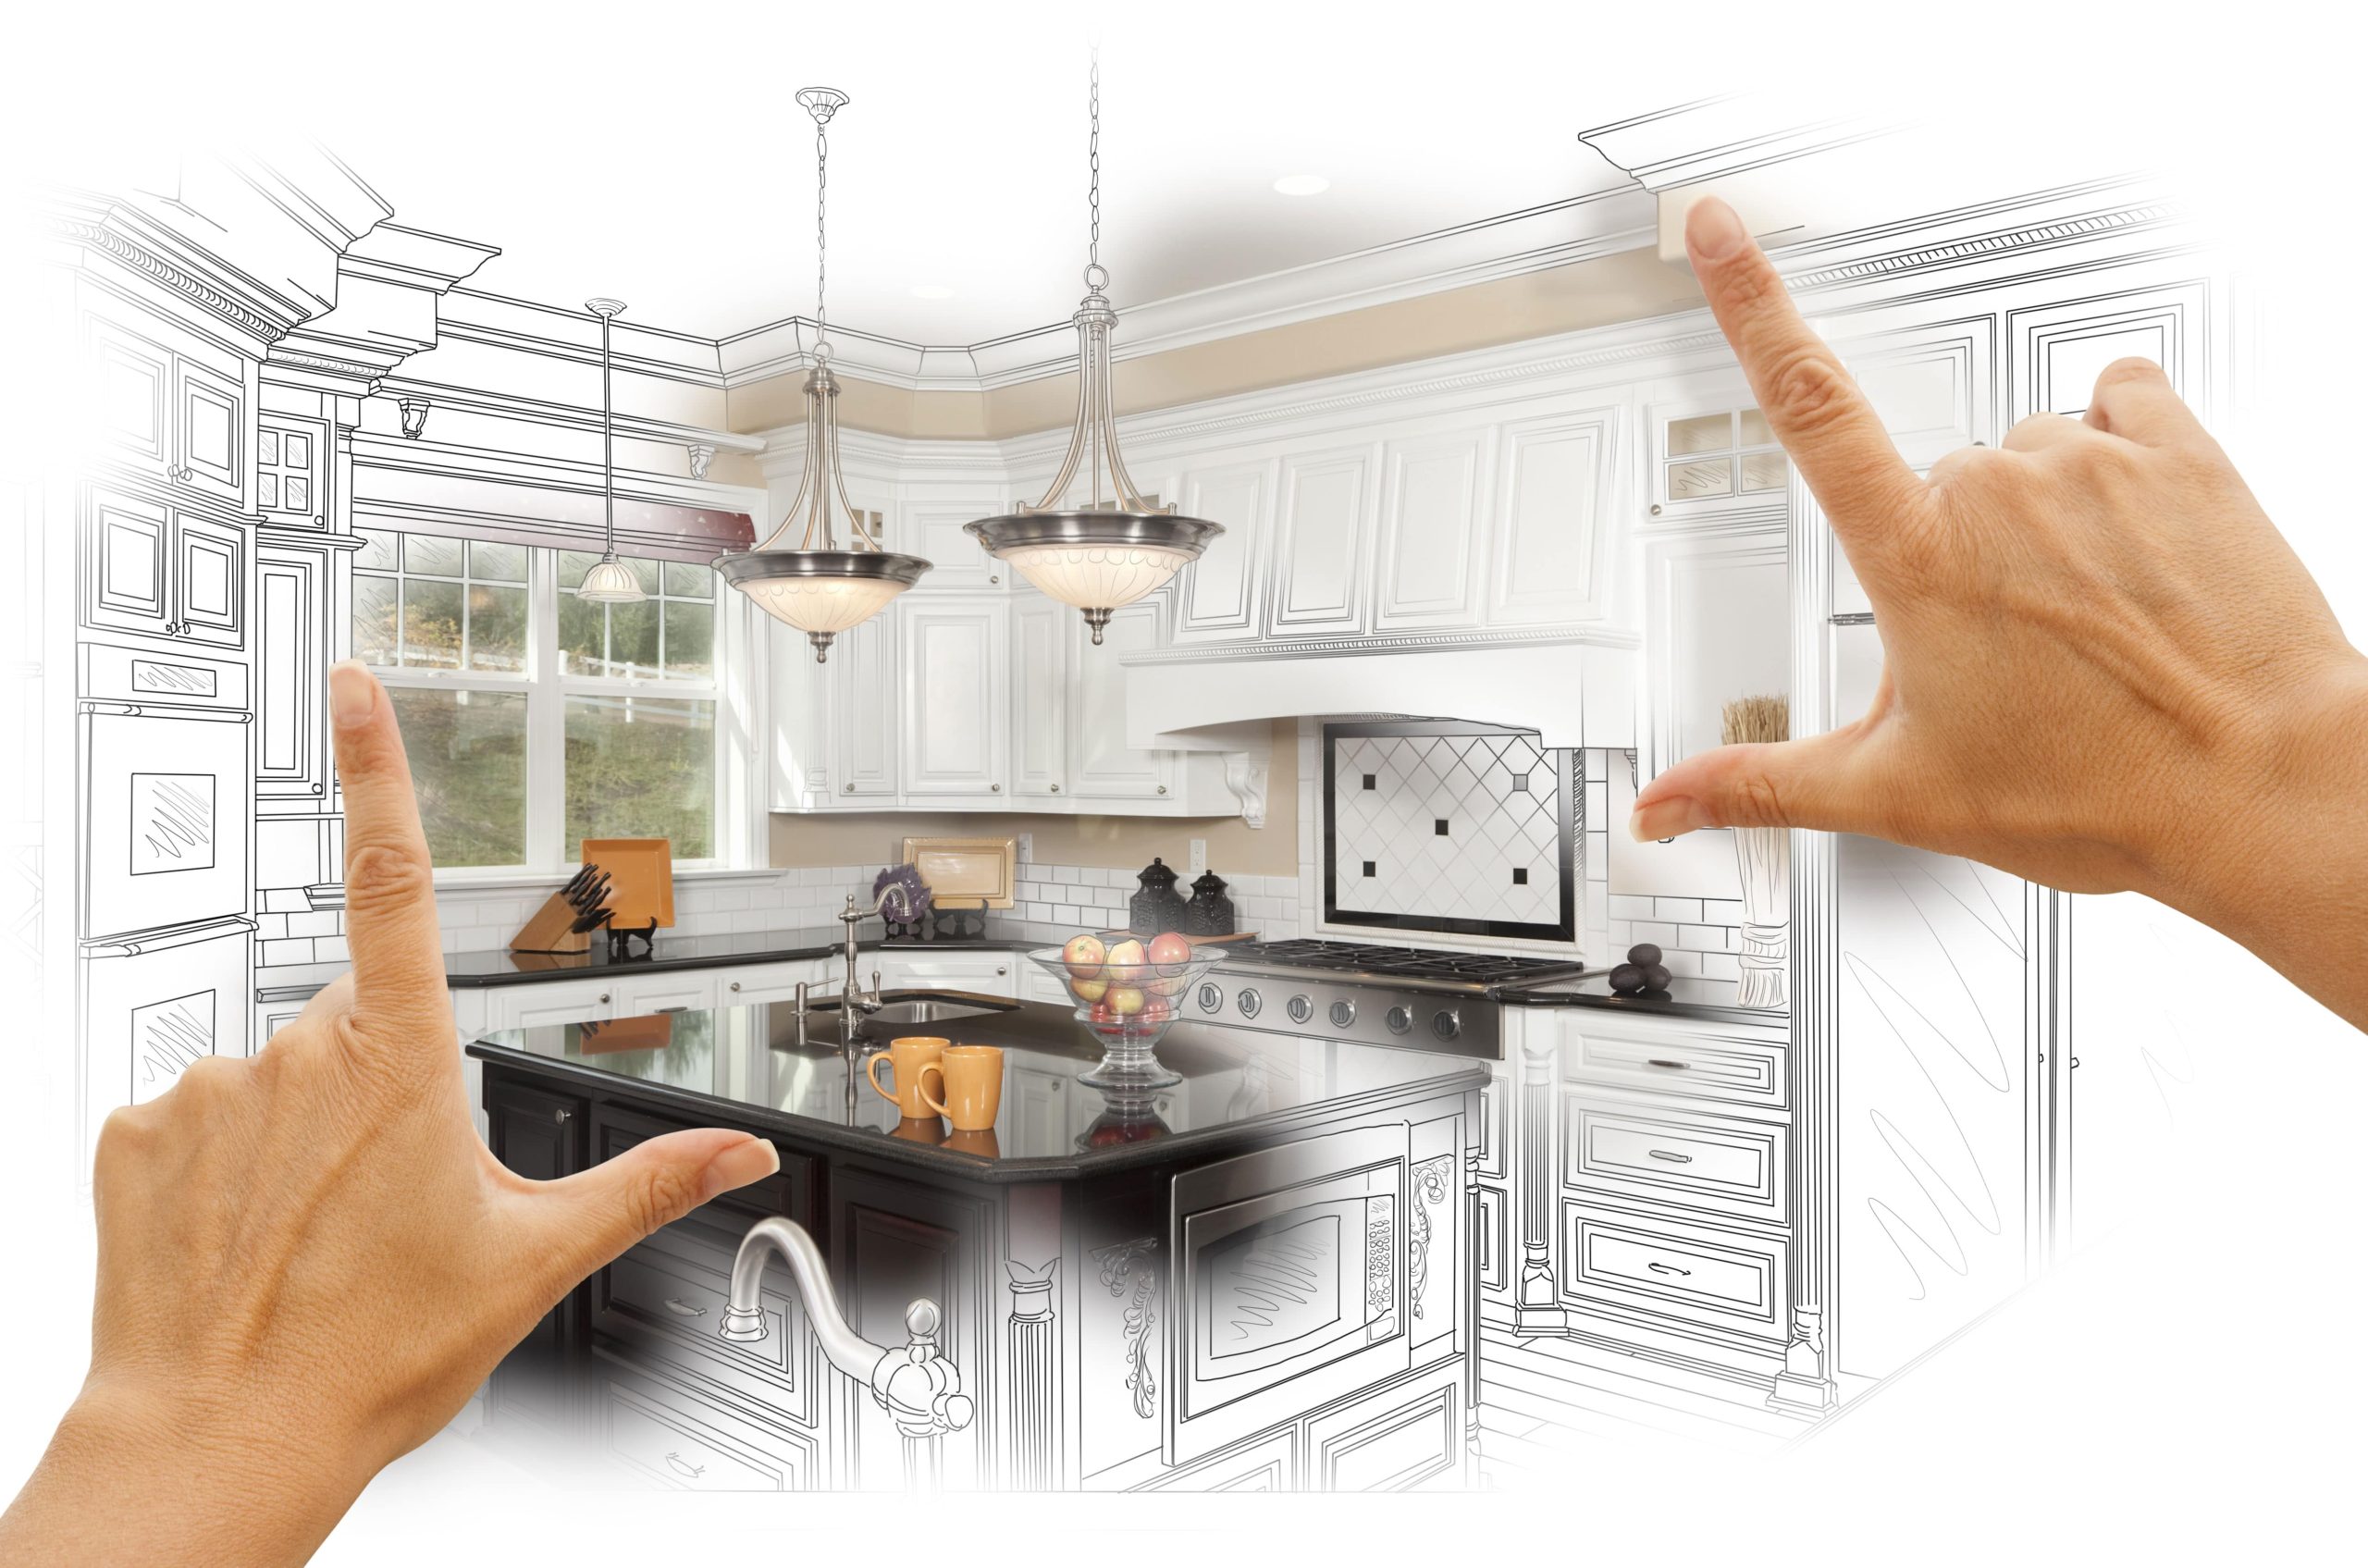 Our specialists in Wheaton, Illinois help you create a kitchen that reflects your personal style and design.